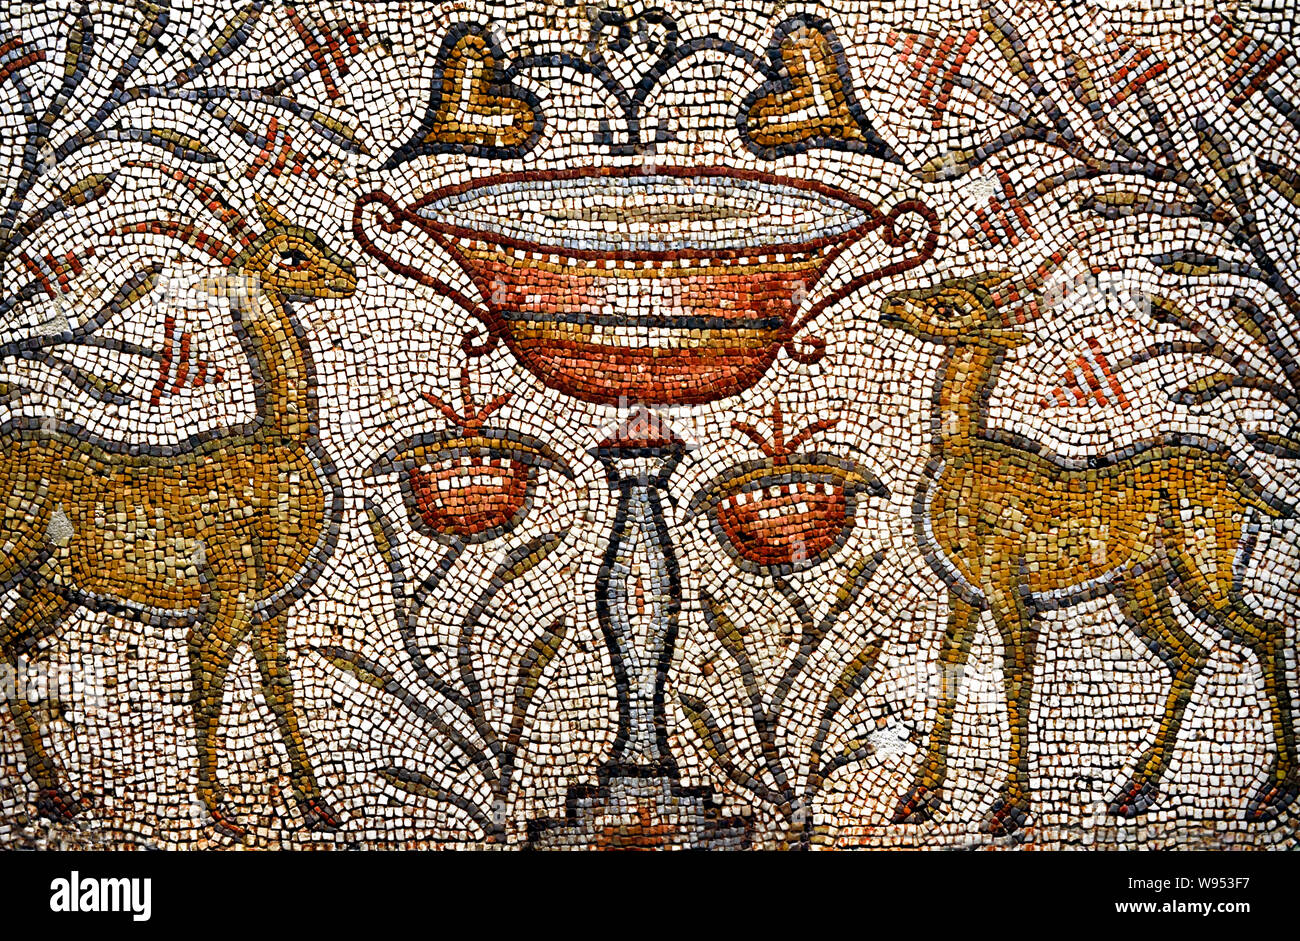 Gazelles faced with a vase - Eastern Mediterranean Mosaic - Cubes of marble and limestone 6th century AD Stock Photo